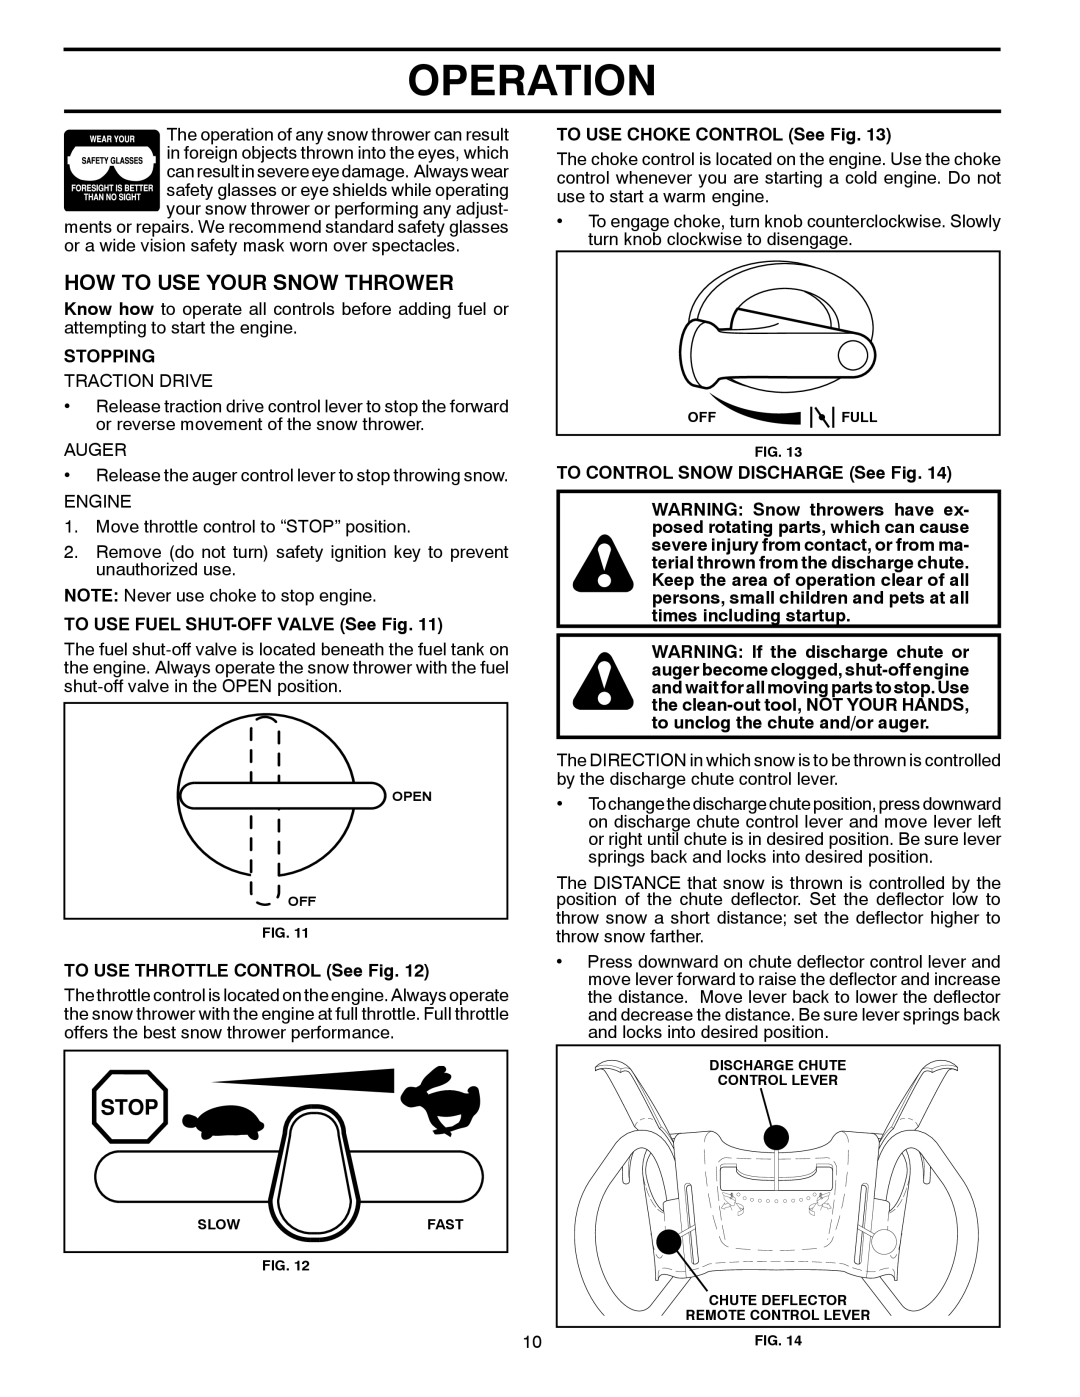 Husqvarna 1130SB-LSB owner manual How To Use Your Snow Thrower, Operation, Stopping, TO USE FUEL SHUT-OFFVALVE See Fig 